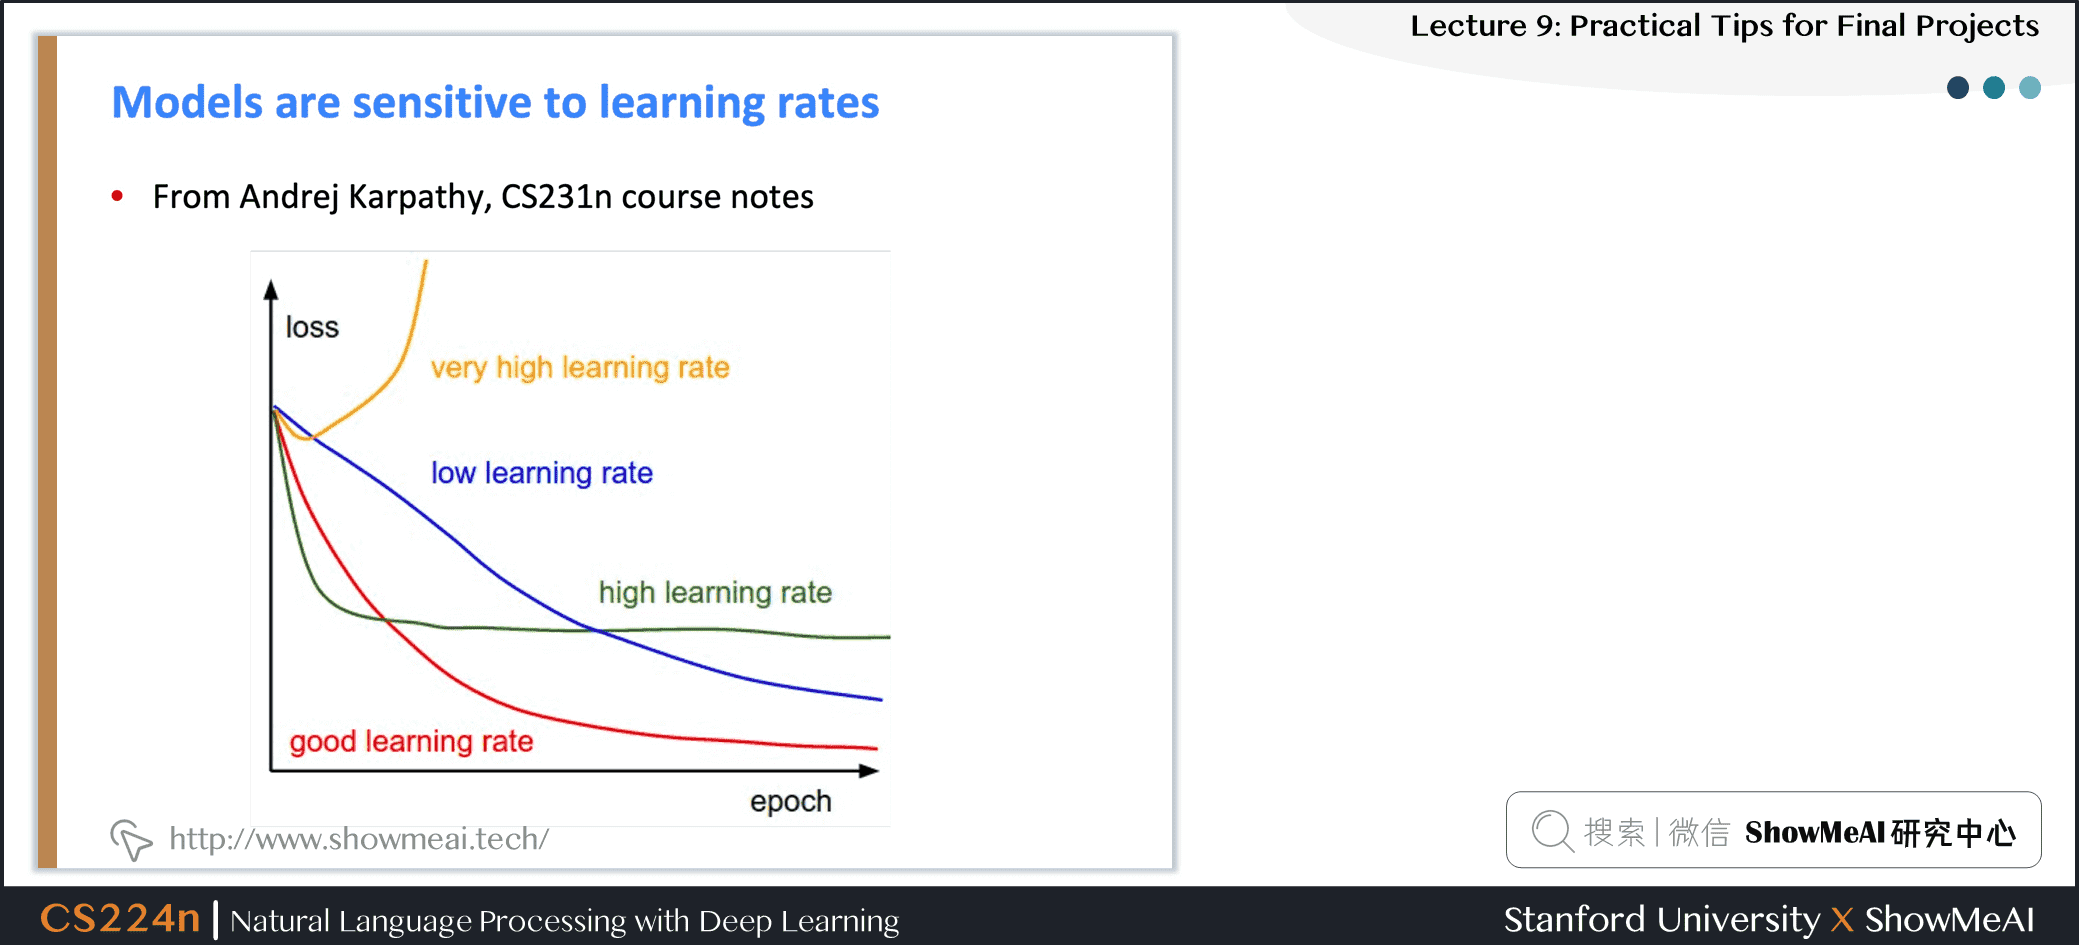 Models are sensitive to learning rates